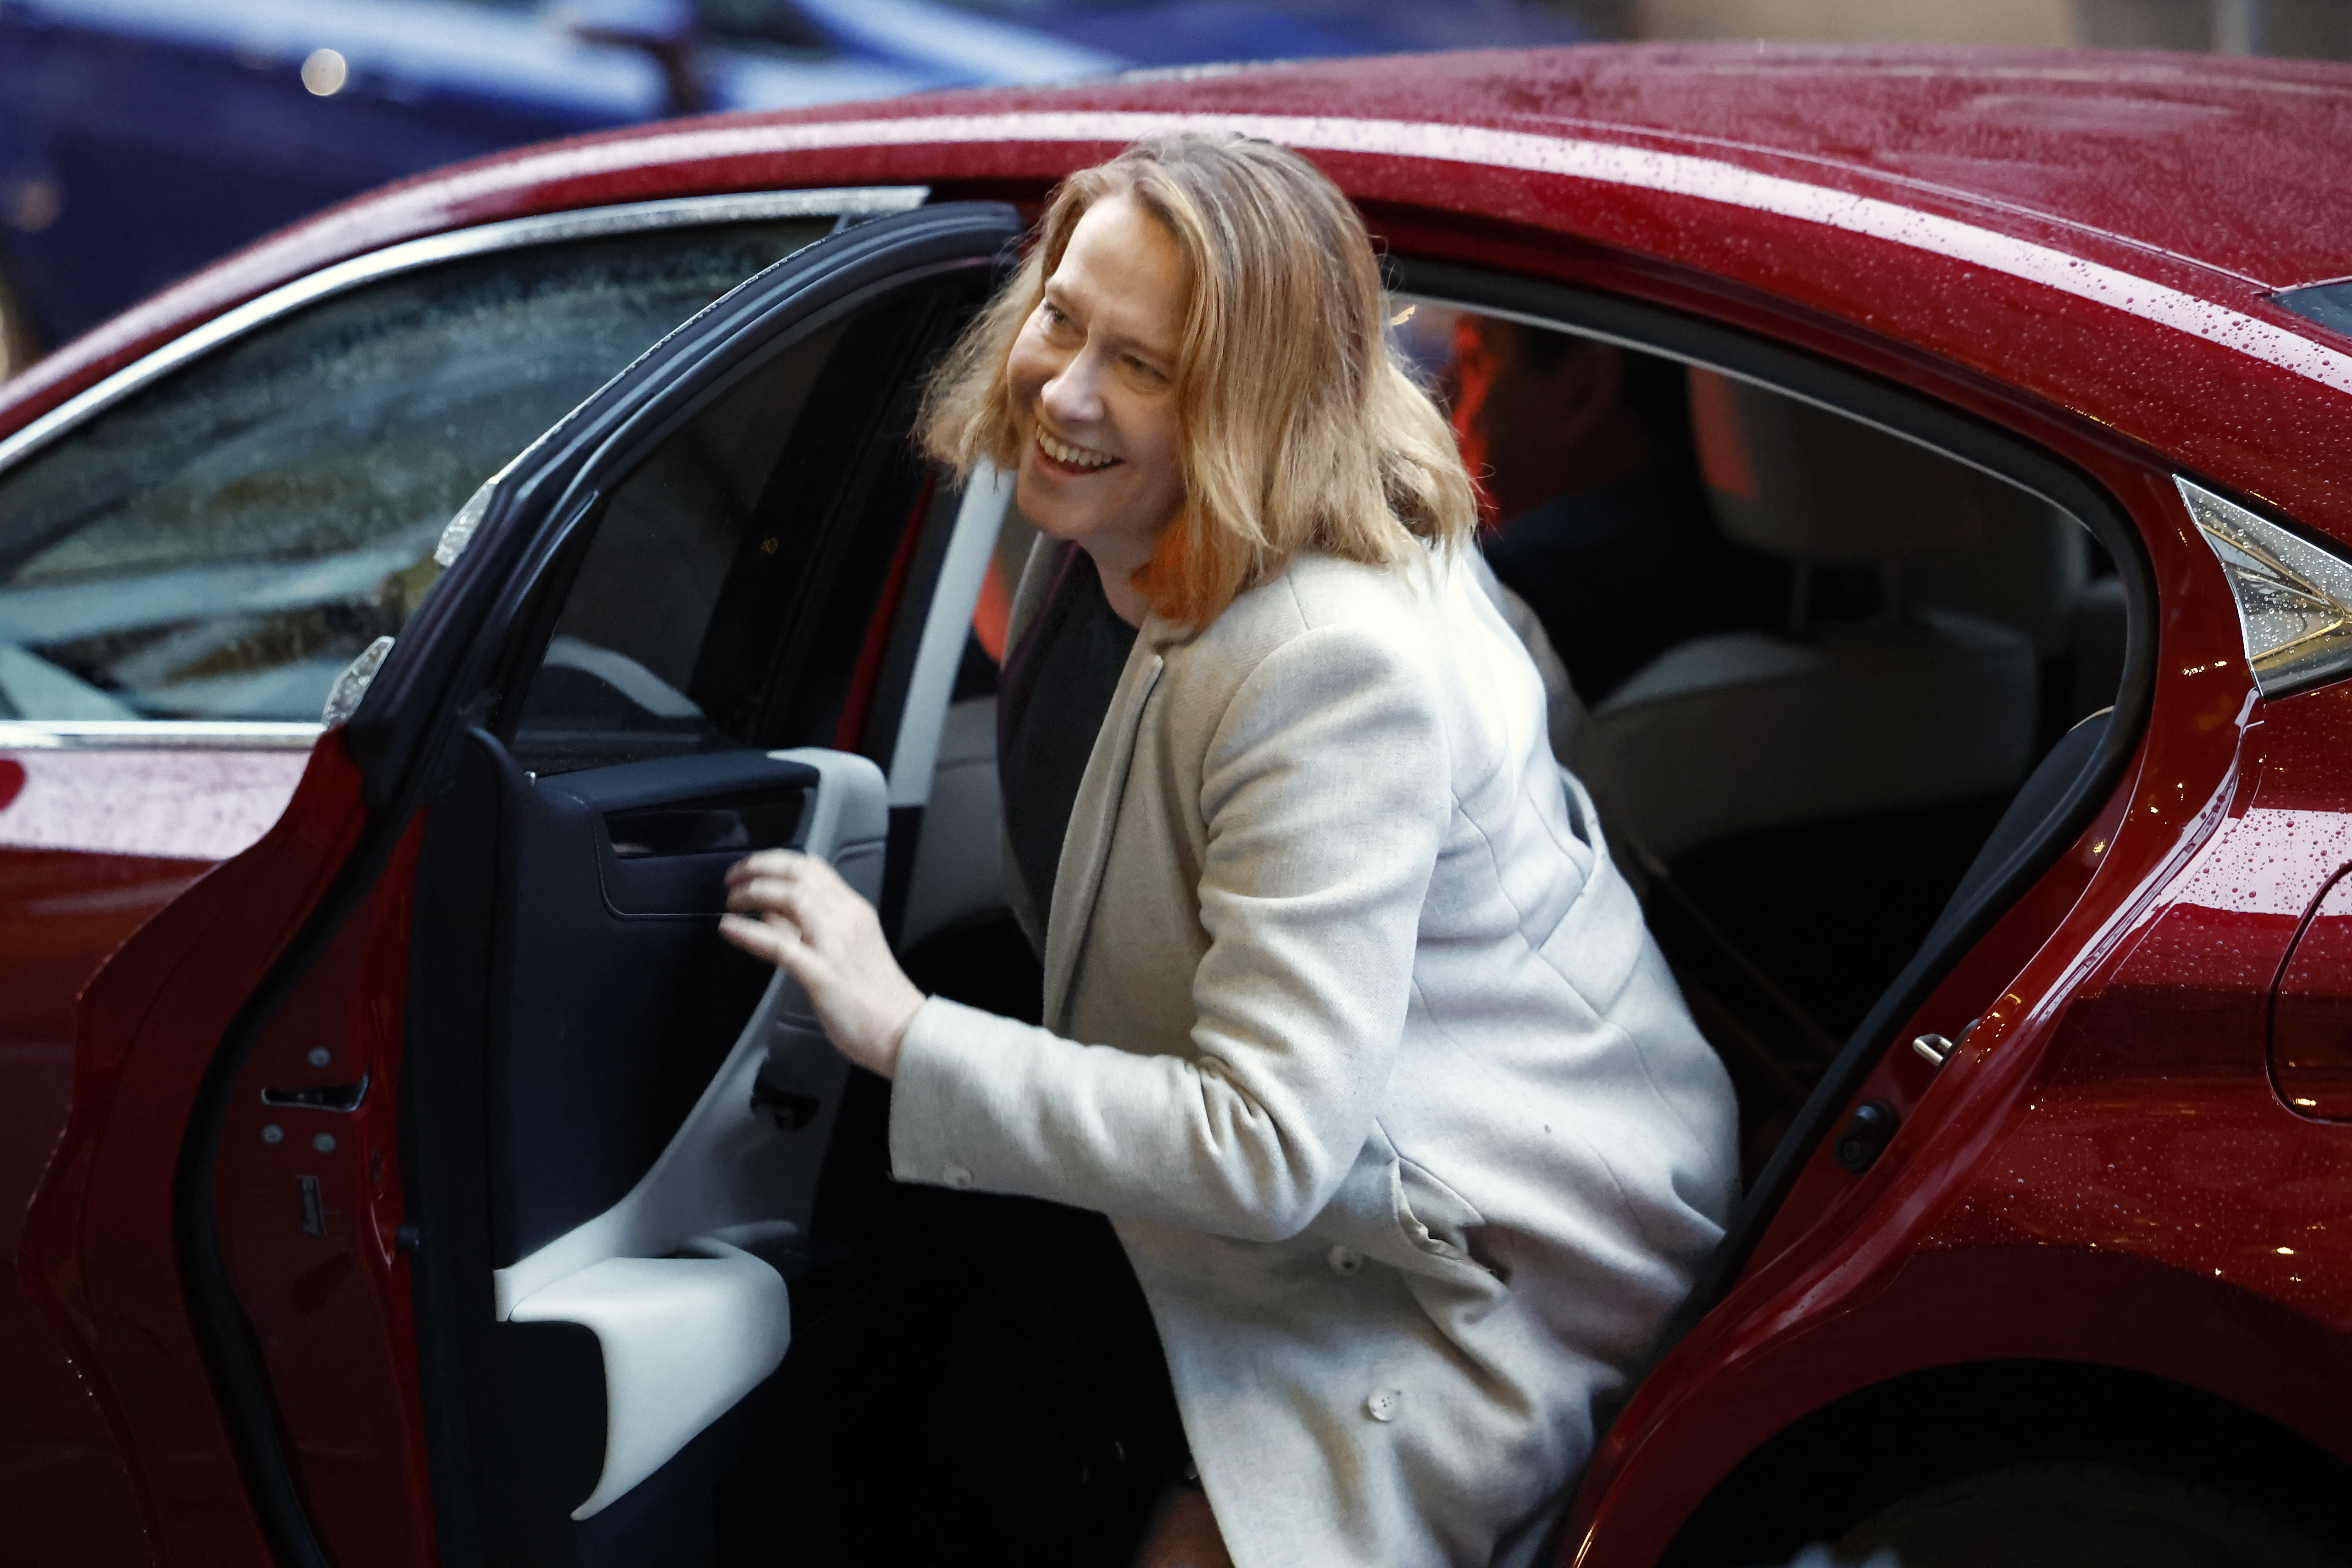 Nicola Sturgeon's former chief of staff, Liz Lloyd, arrives at the Covid inquiry at the Edinburgh International Conference Centre (EICC) on January 25.